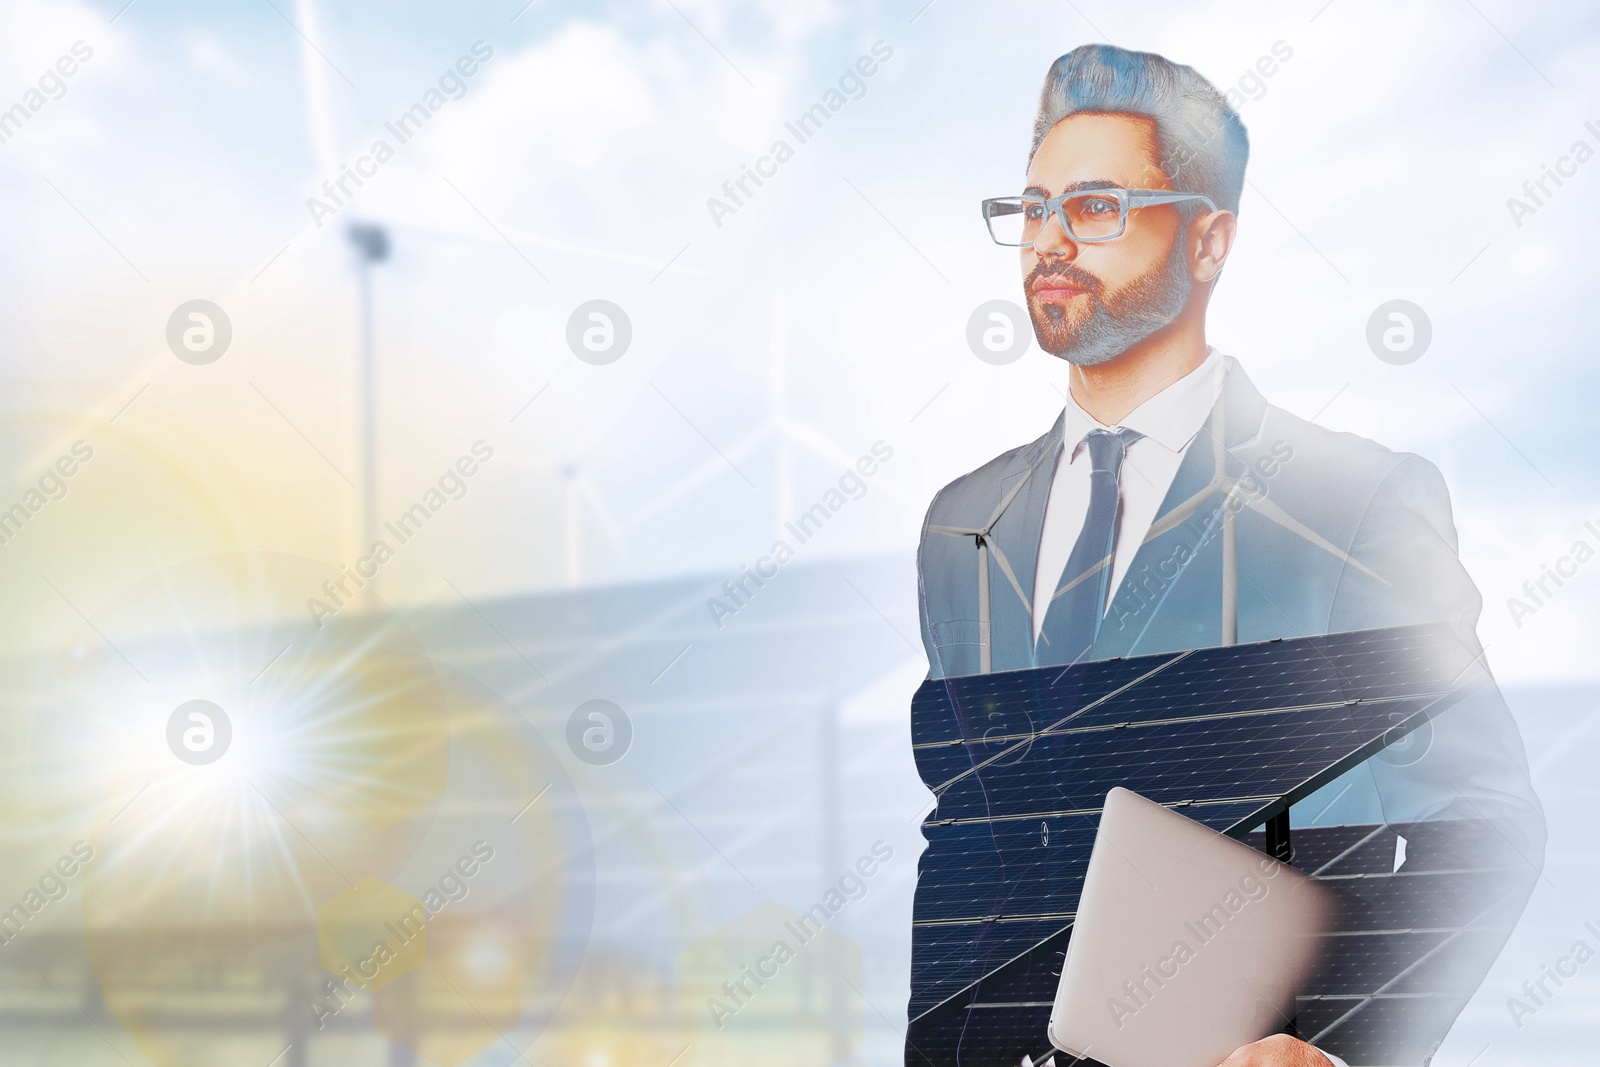 Image of Multiple exposure of businessman with laptop, wind turbines and solar panels installed outdoors. Alternative energy source